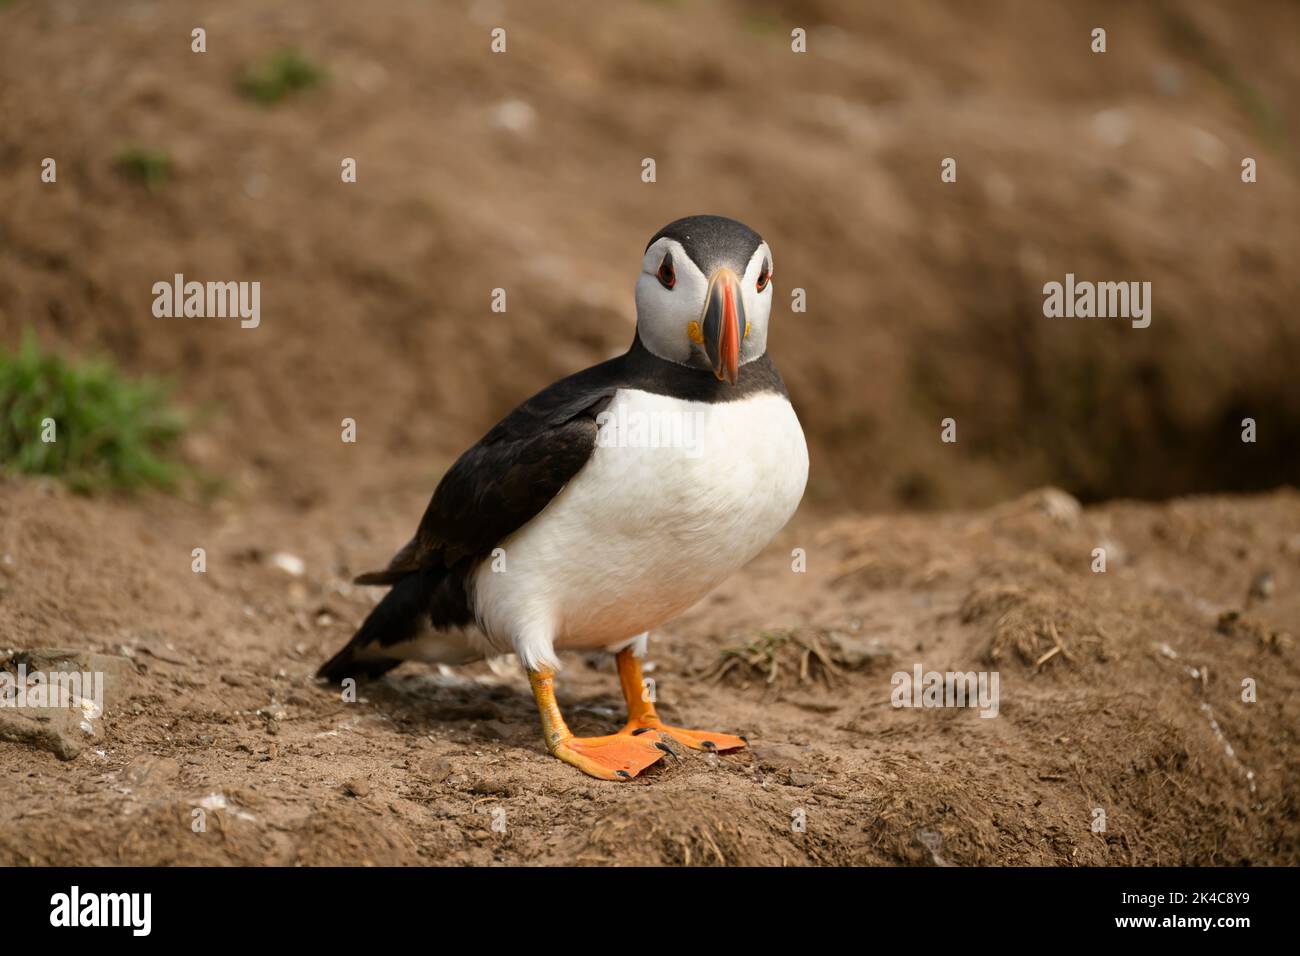 A closeup of adorable Atlantic puffin bird looking around standing on the ground Stock Photo